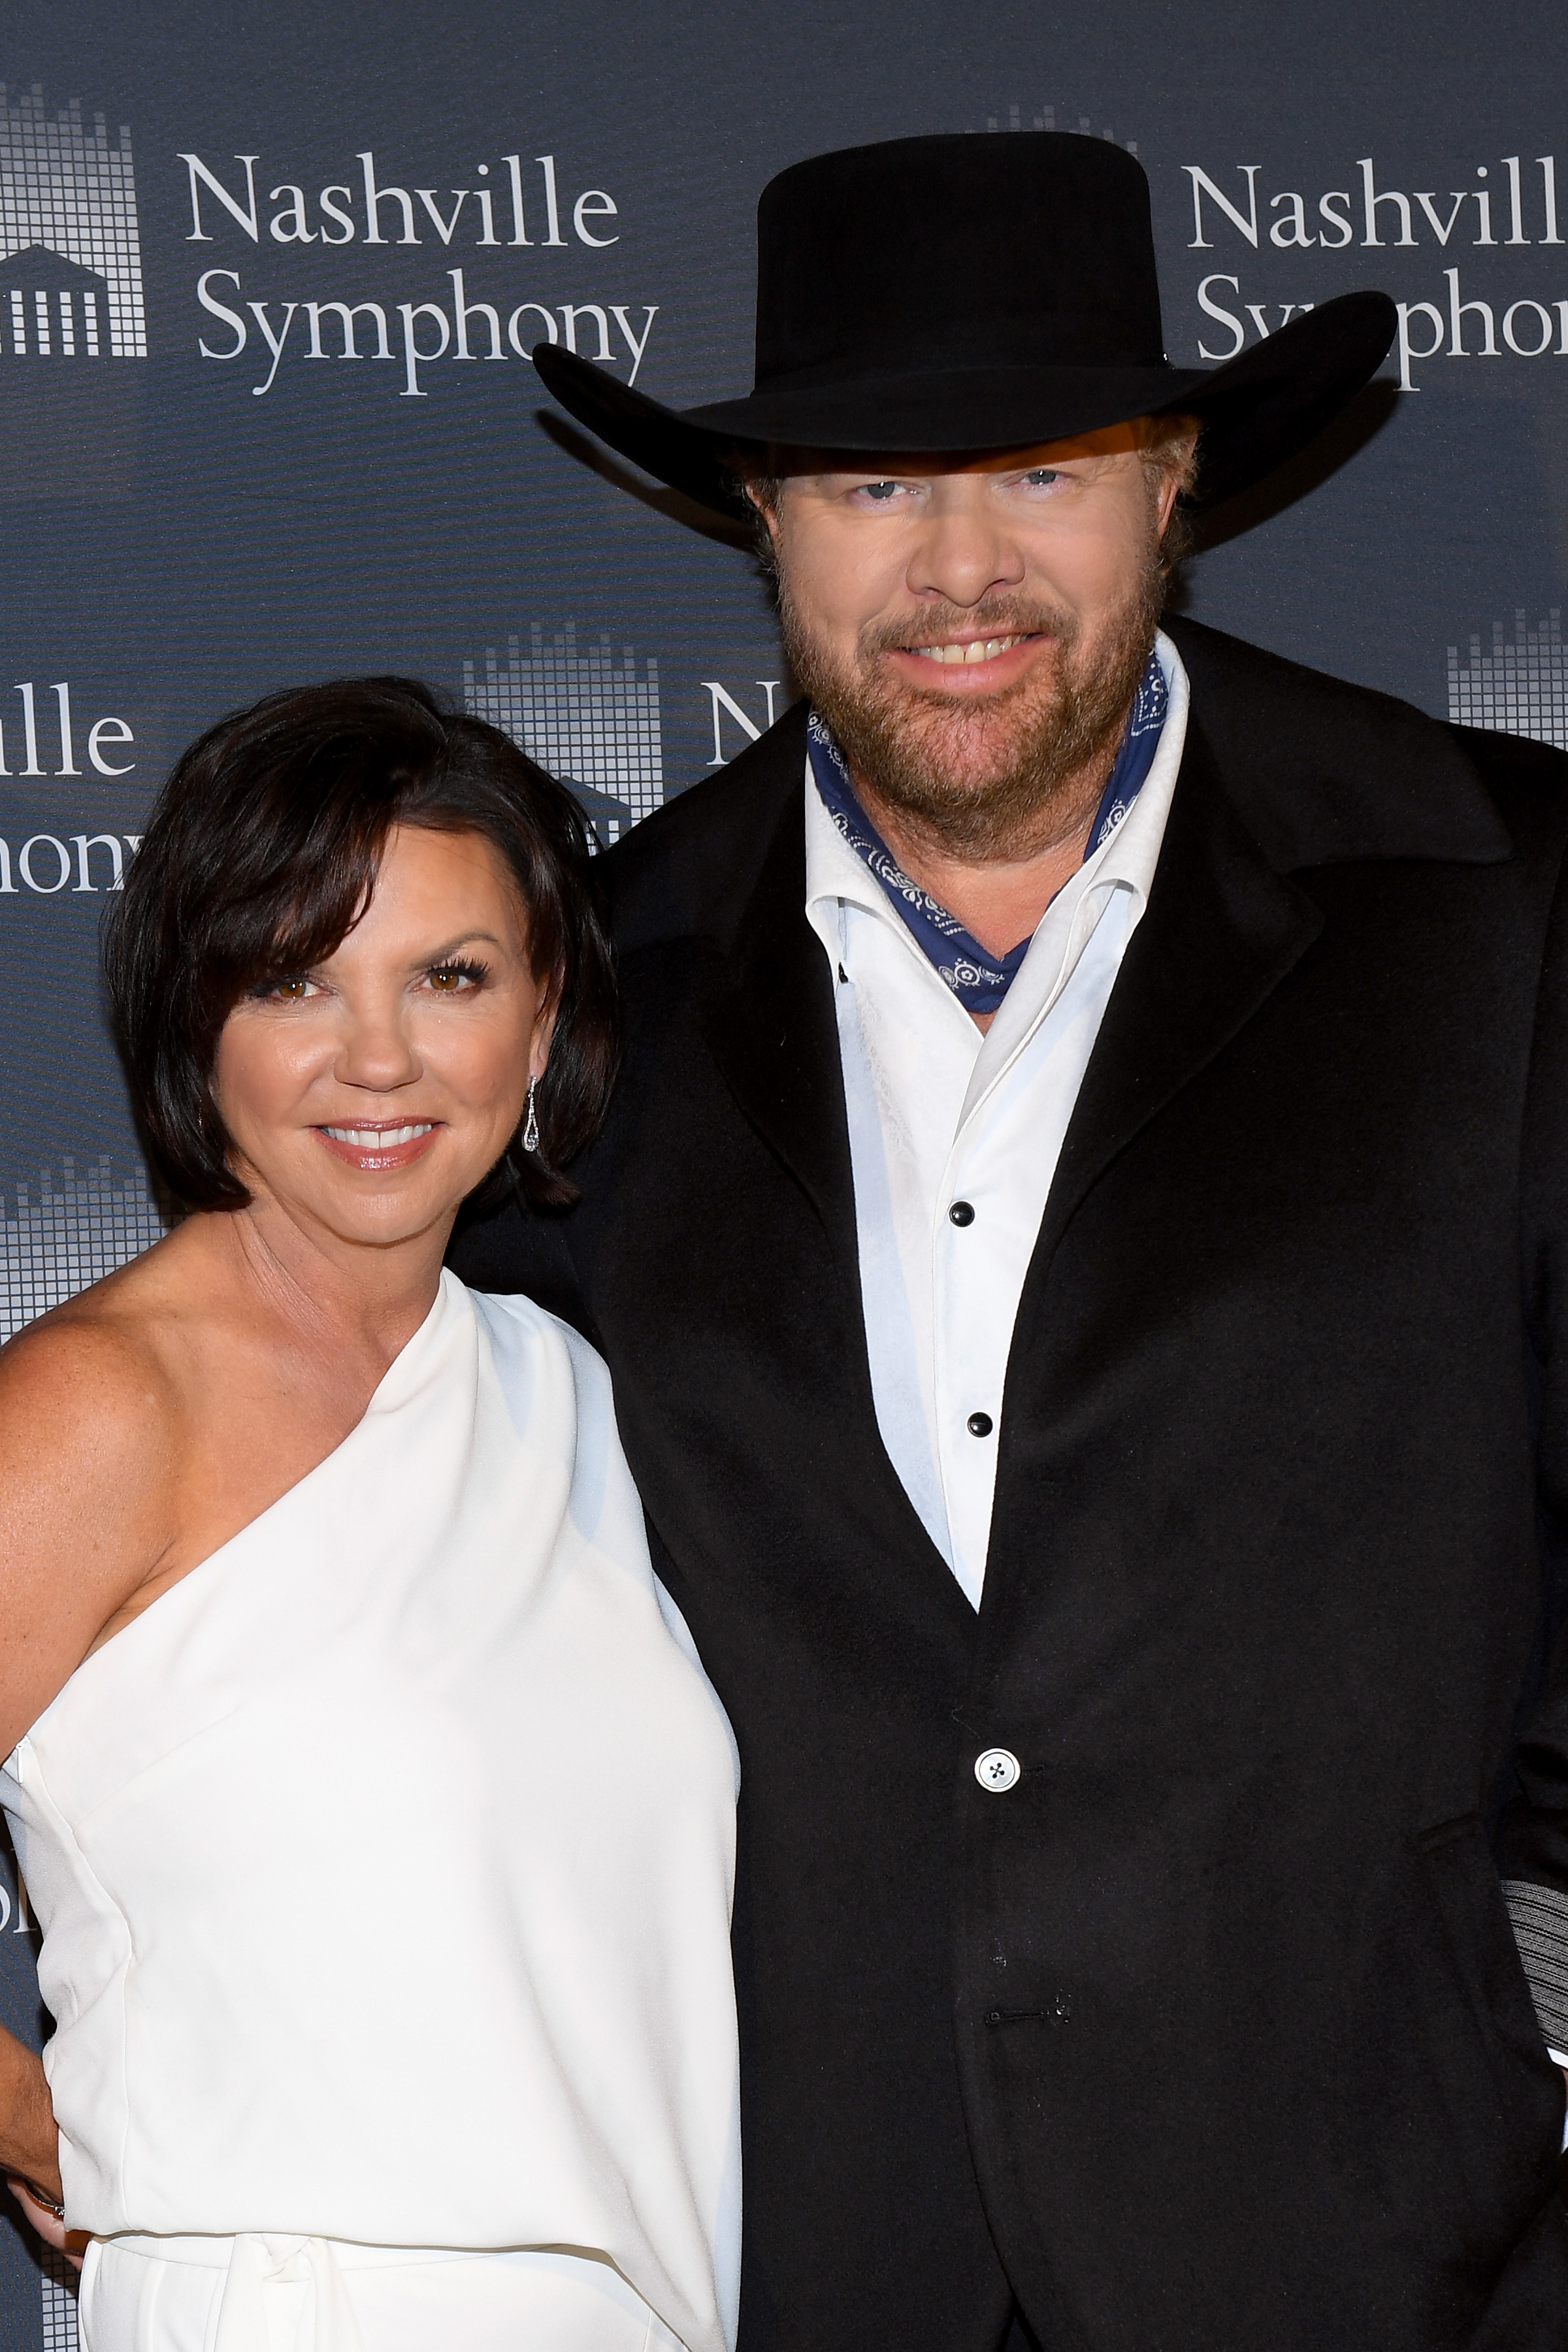 Tricia Lucus and Toby Keith attend the 34th Annual Nashville Symphony Ball at Schermerhorn Symphony Center on December 8, 2018 in Nashville, Tennessee. | Source: Getty Images